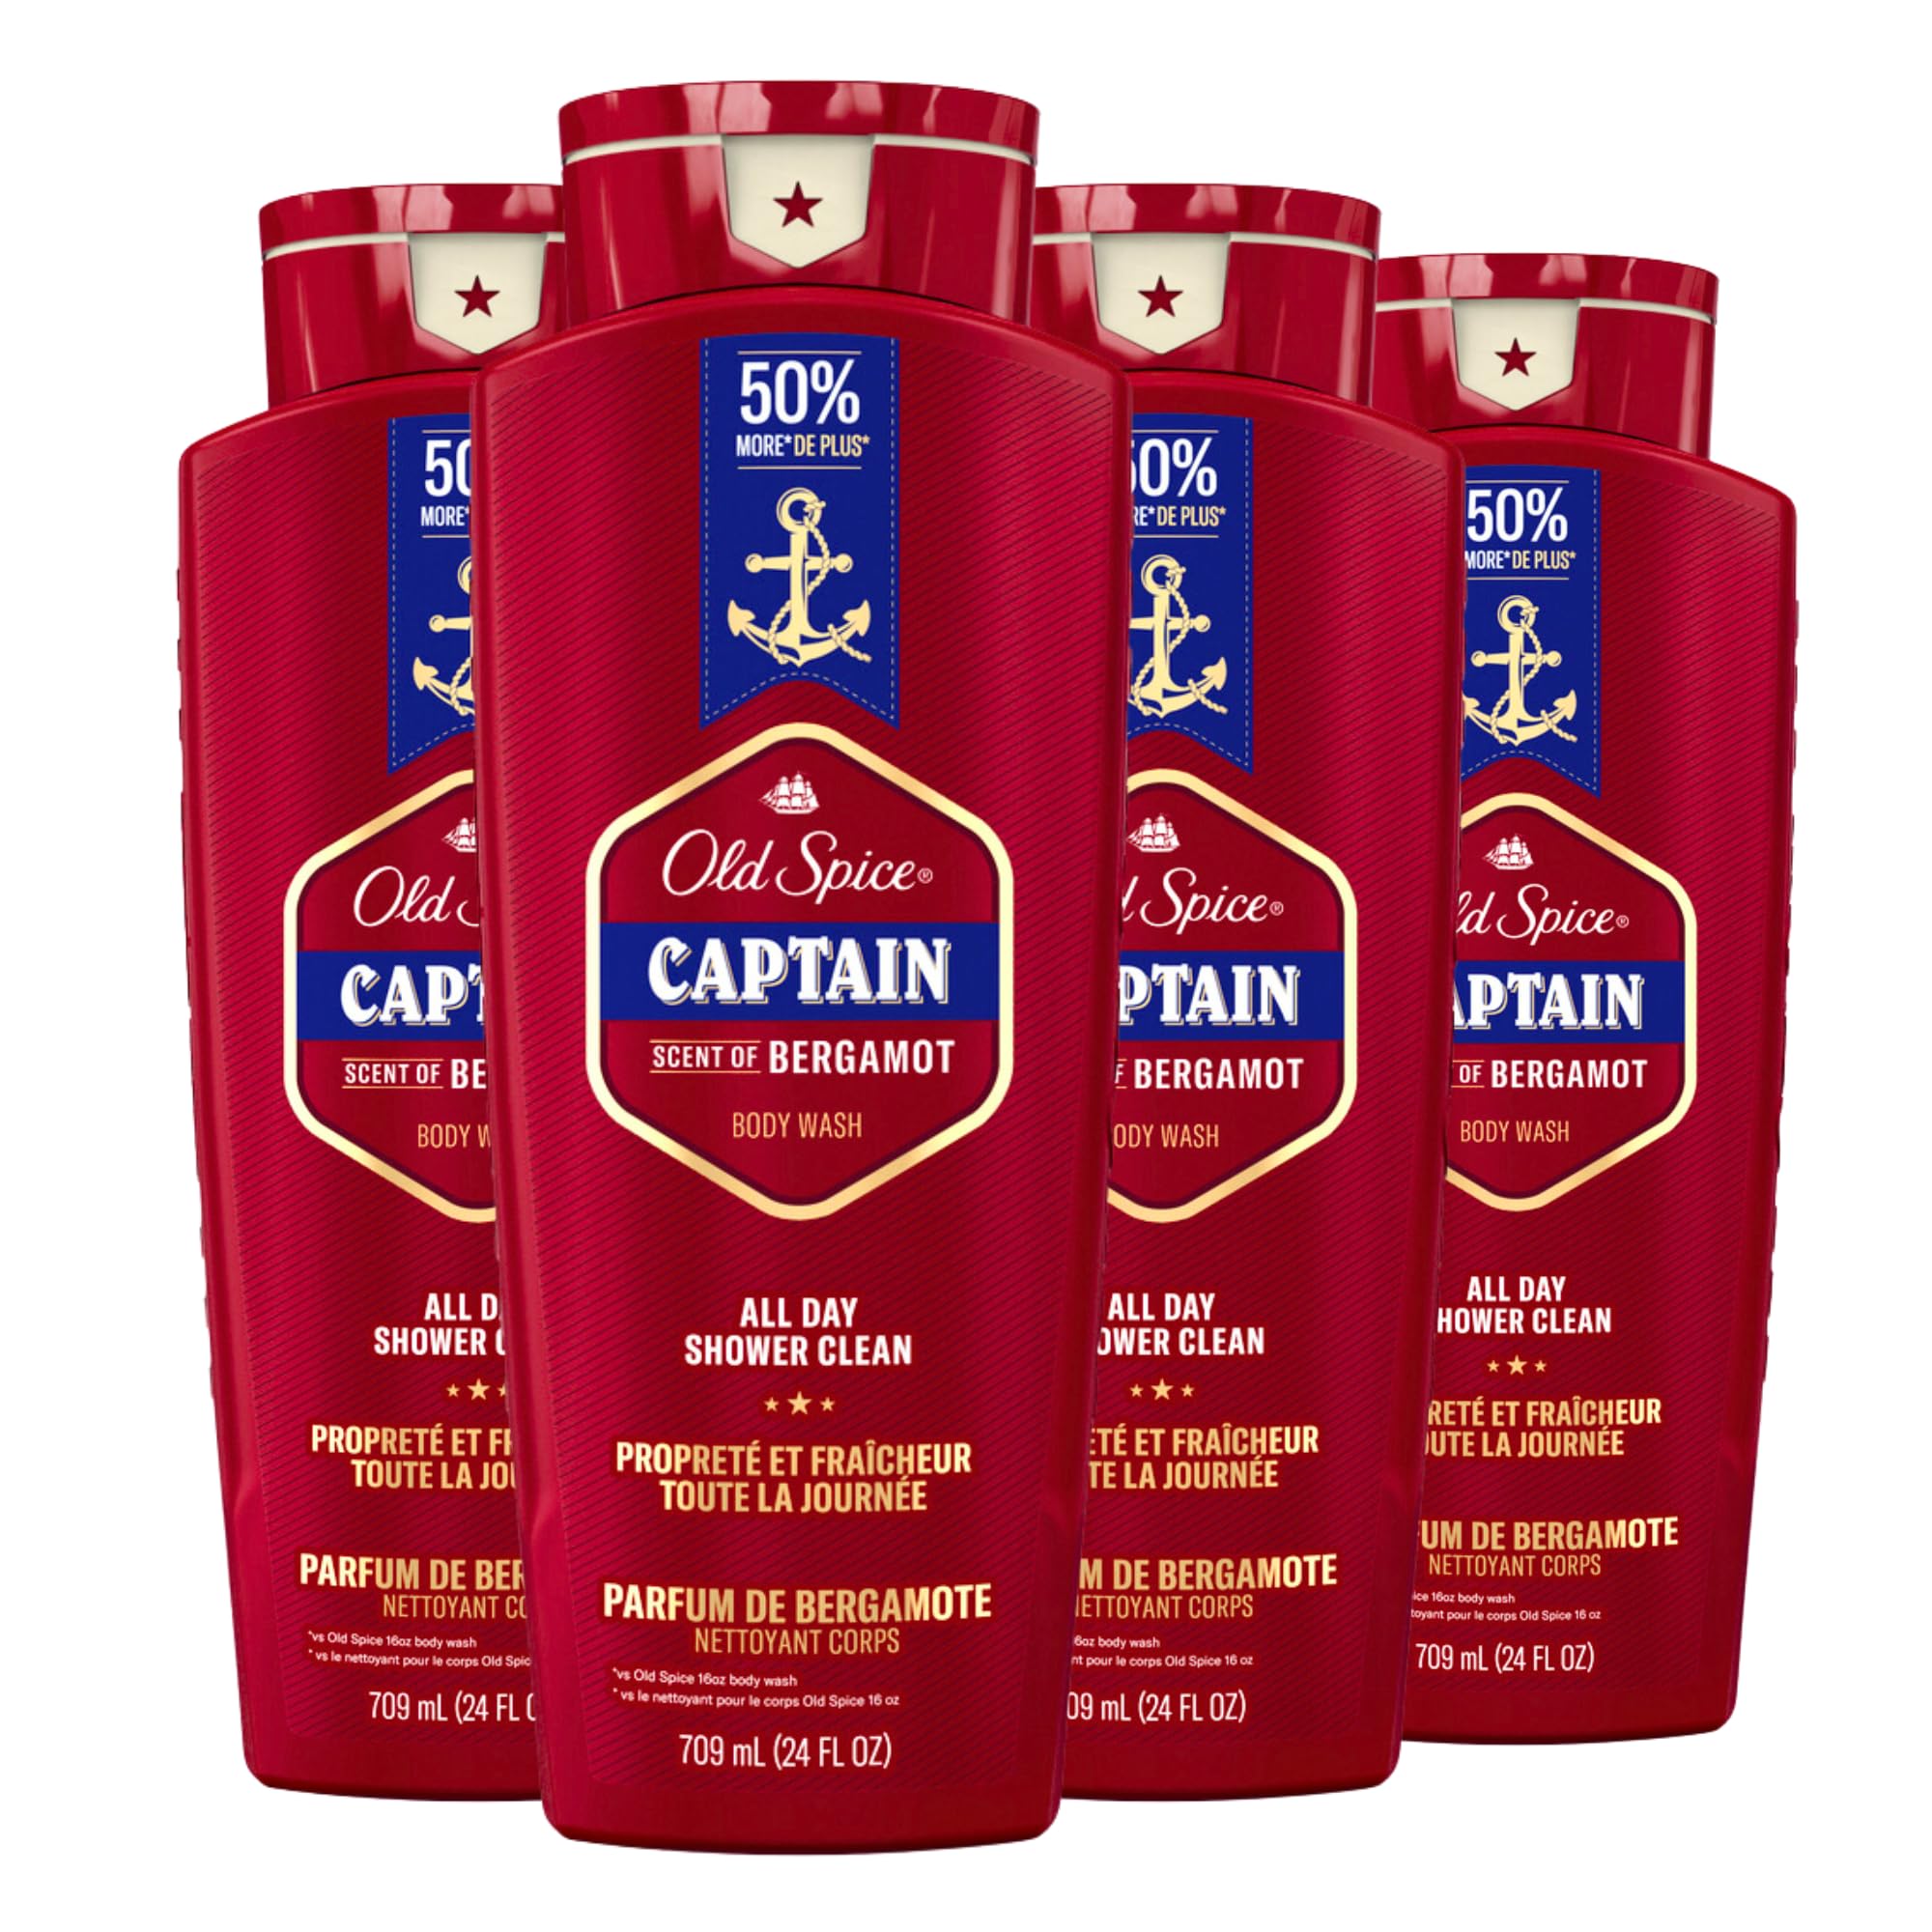 Old Spice Red Collection Body Wash for Men, Captain Scent, 24 fl oz (Pack of 4)